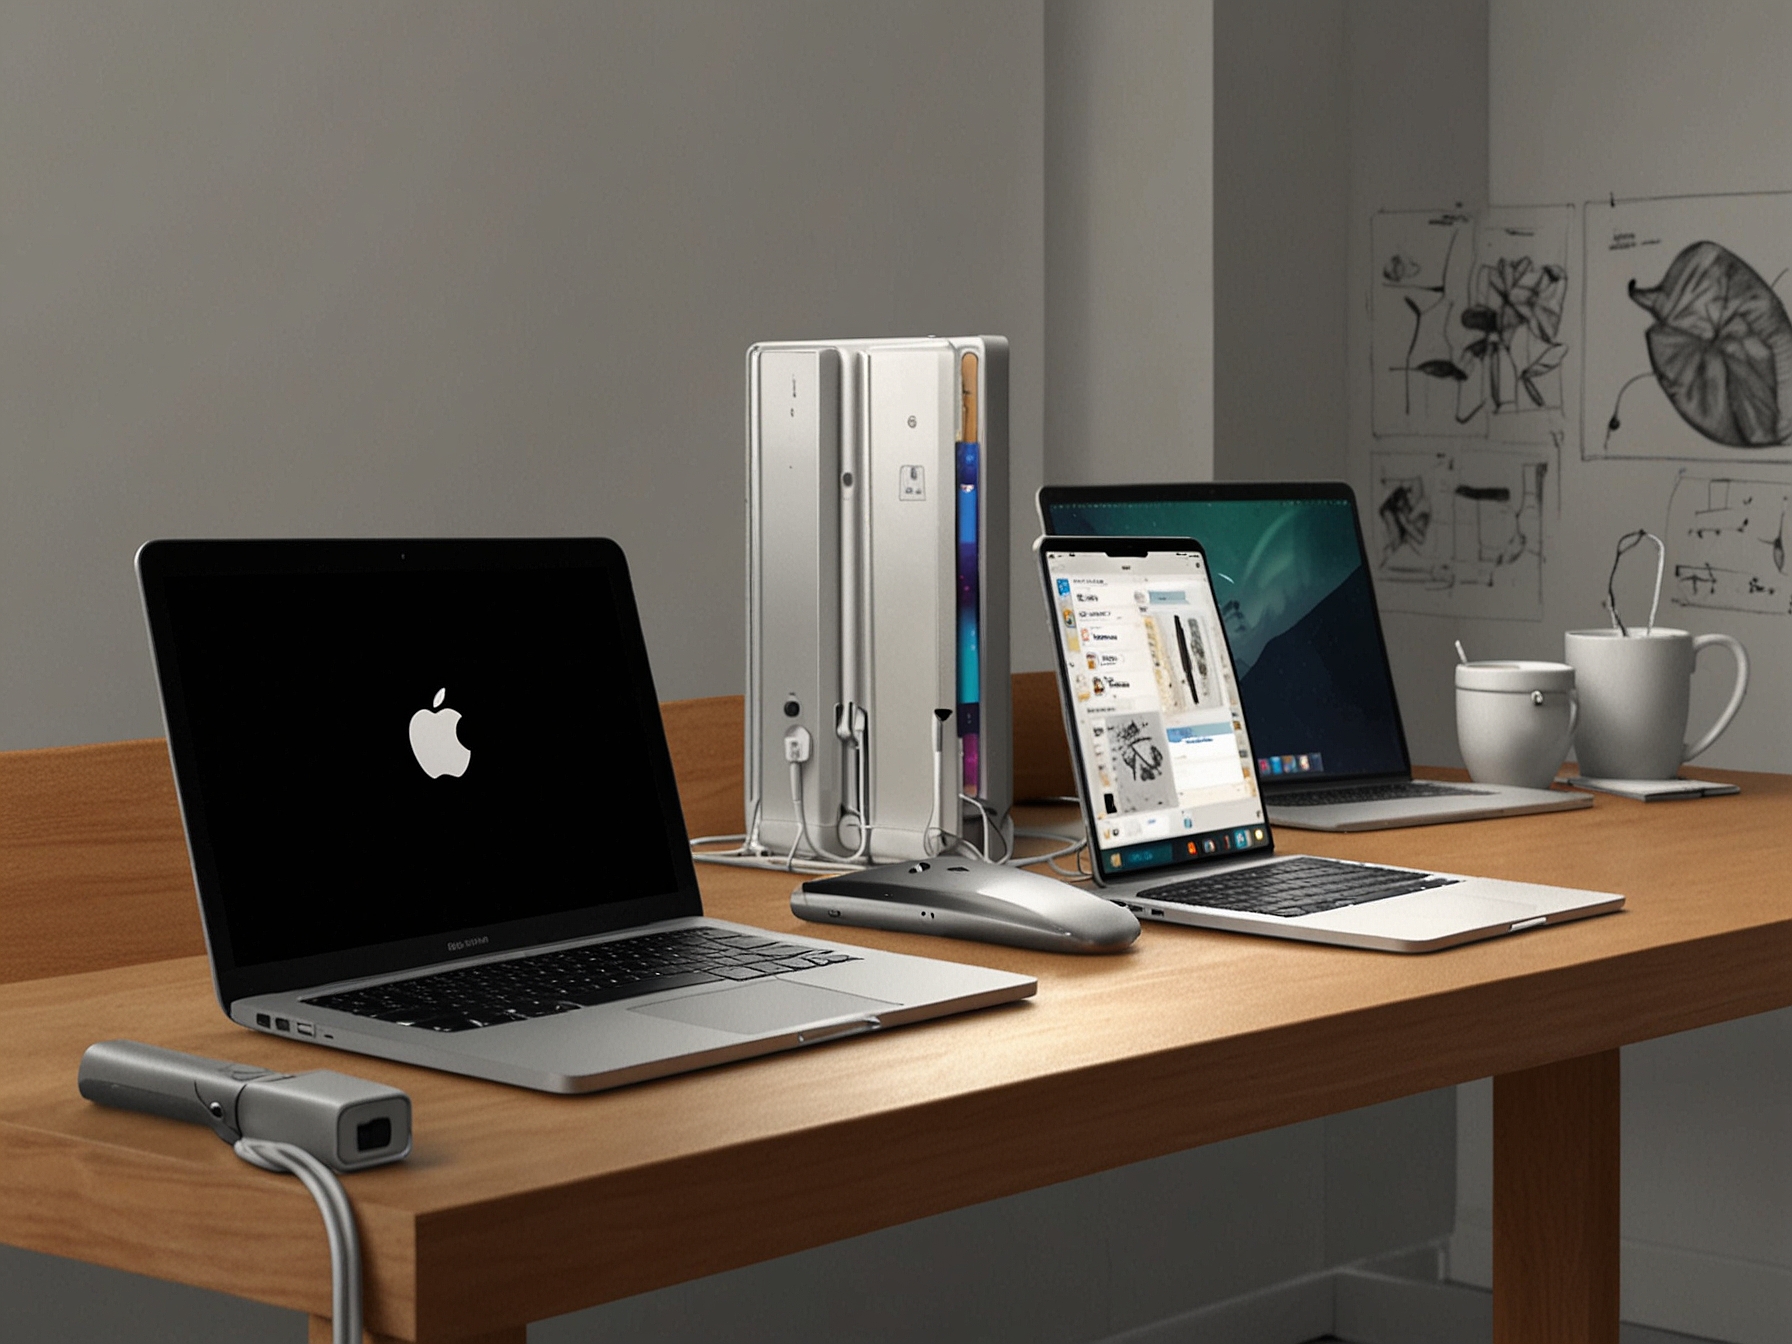 An illustration of various Apple products including iPhone, iPad, MacBook, and Apple Watch, representing the company's robust and interconnected ecosystem.